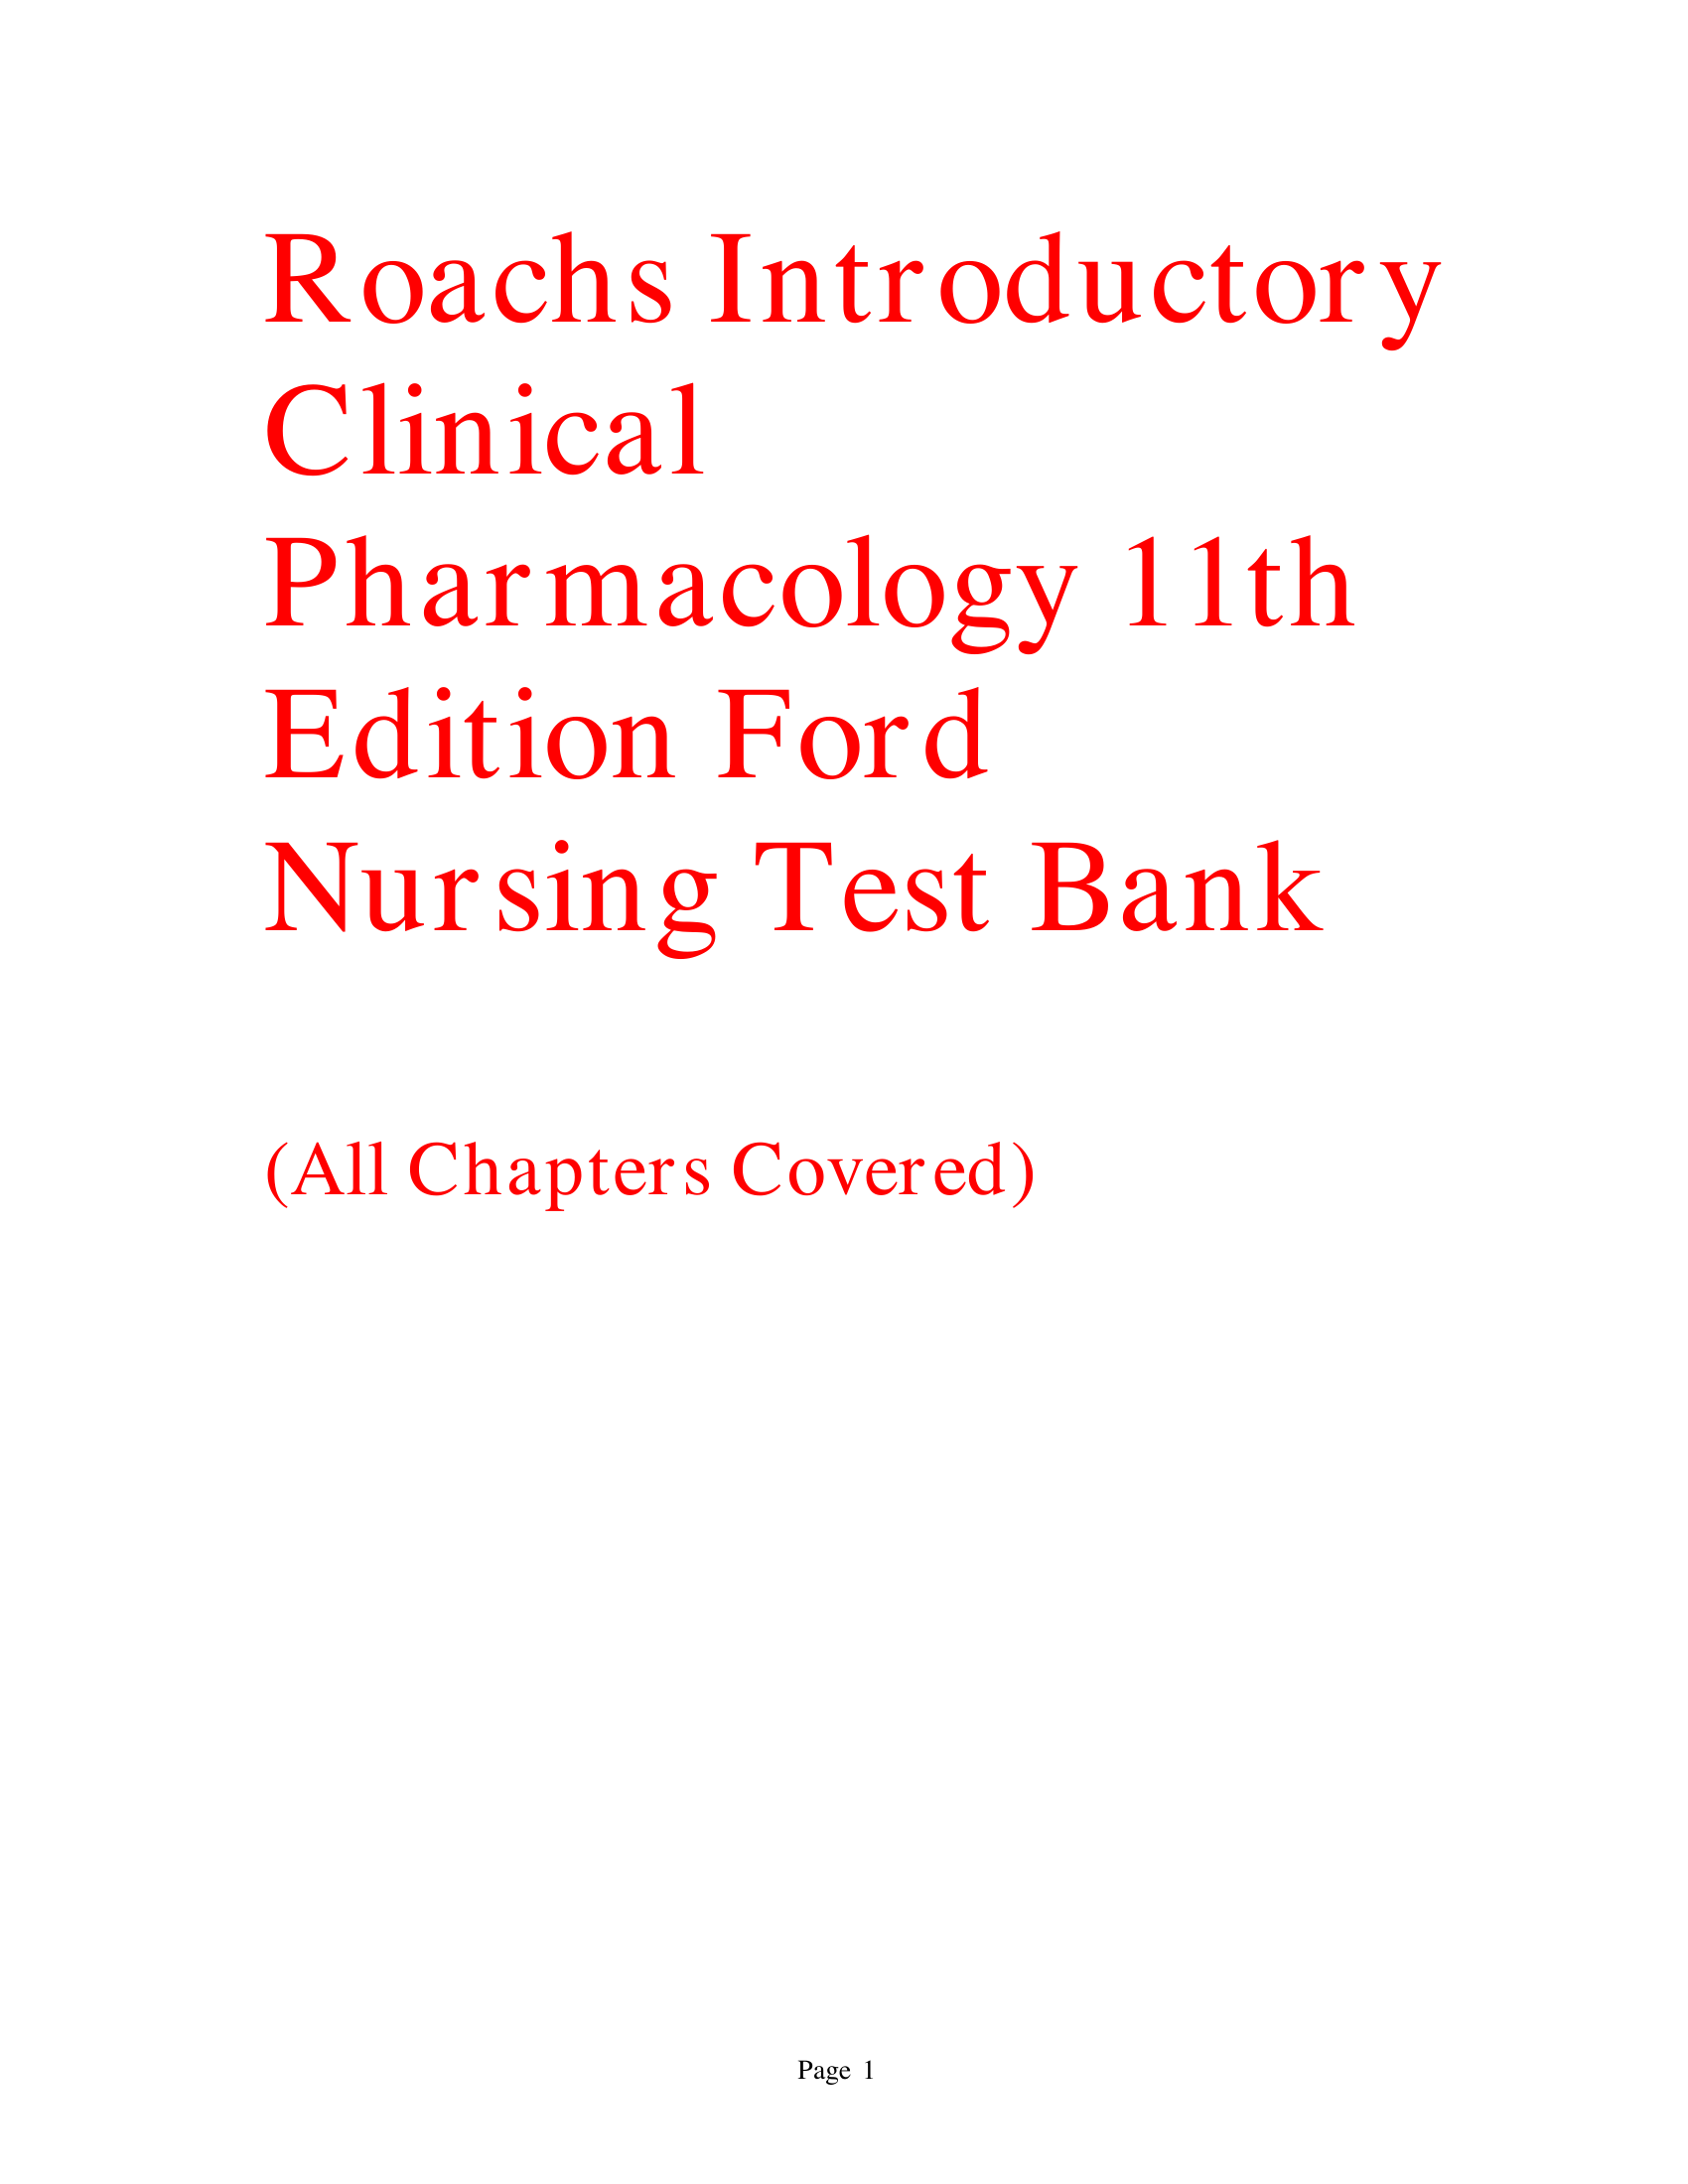 Roach’s Introductory Clinical Pharmacology